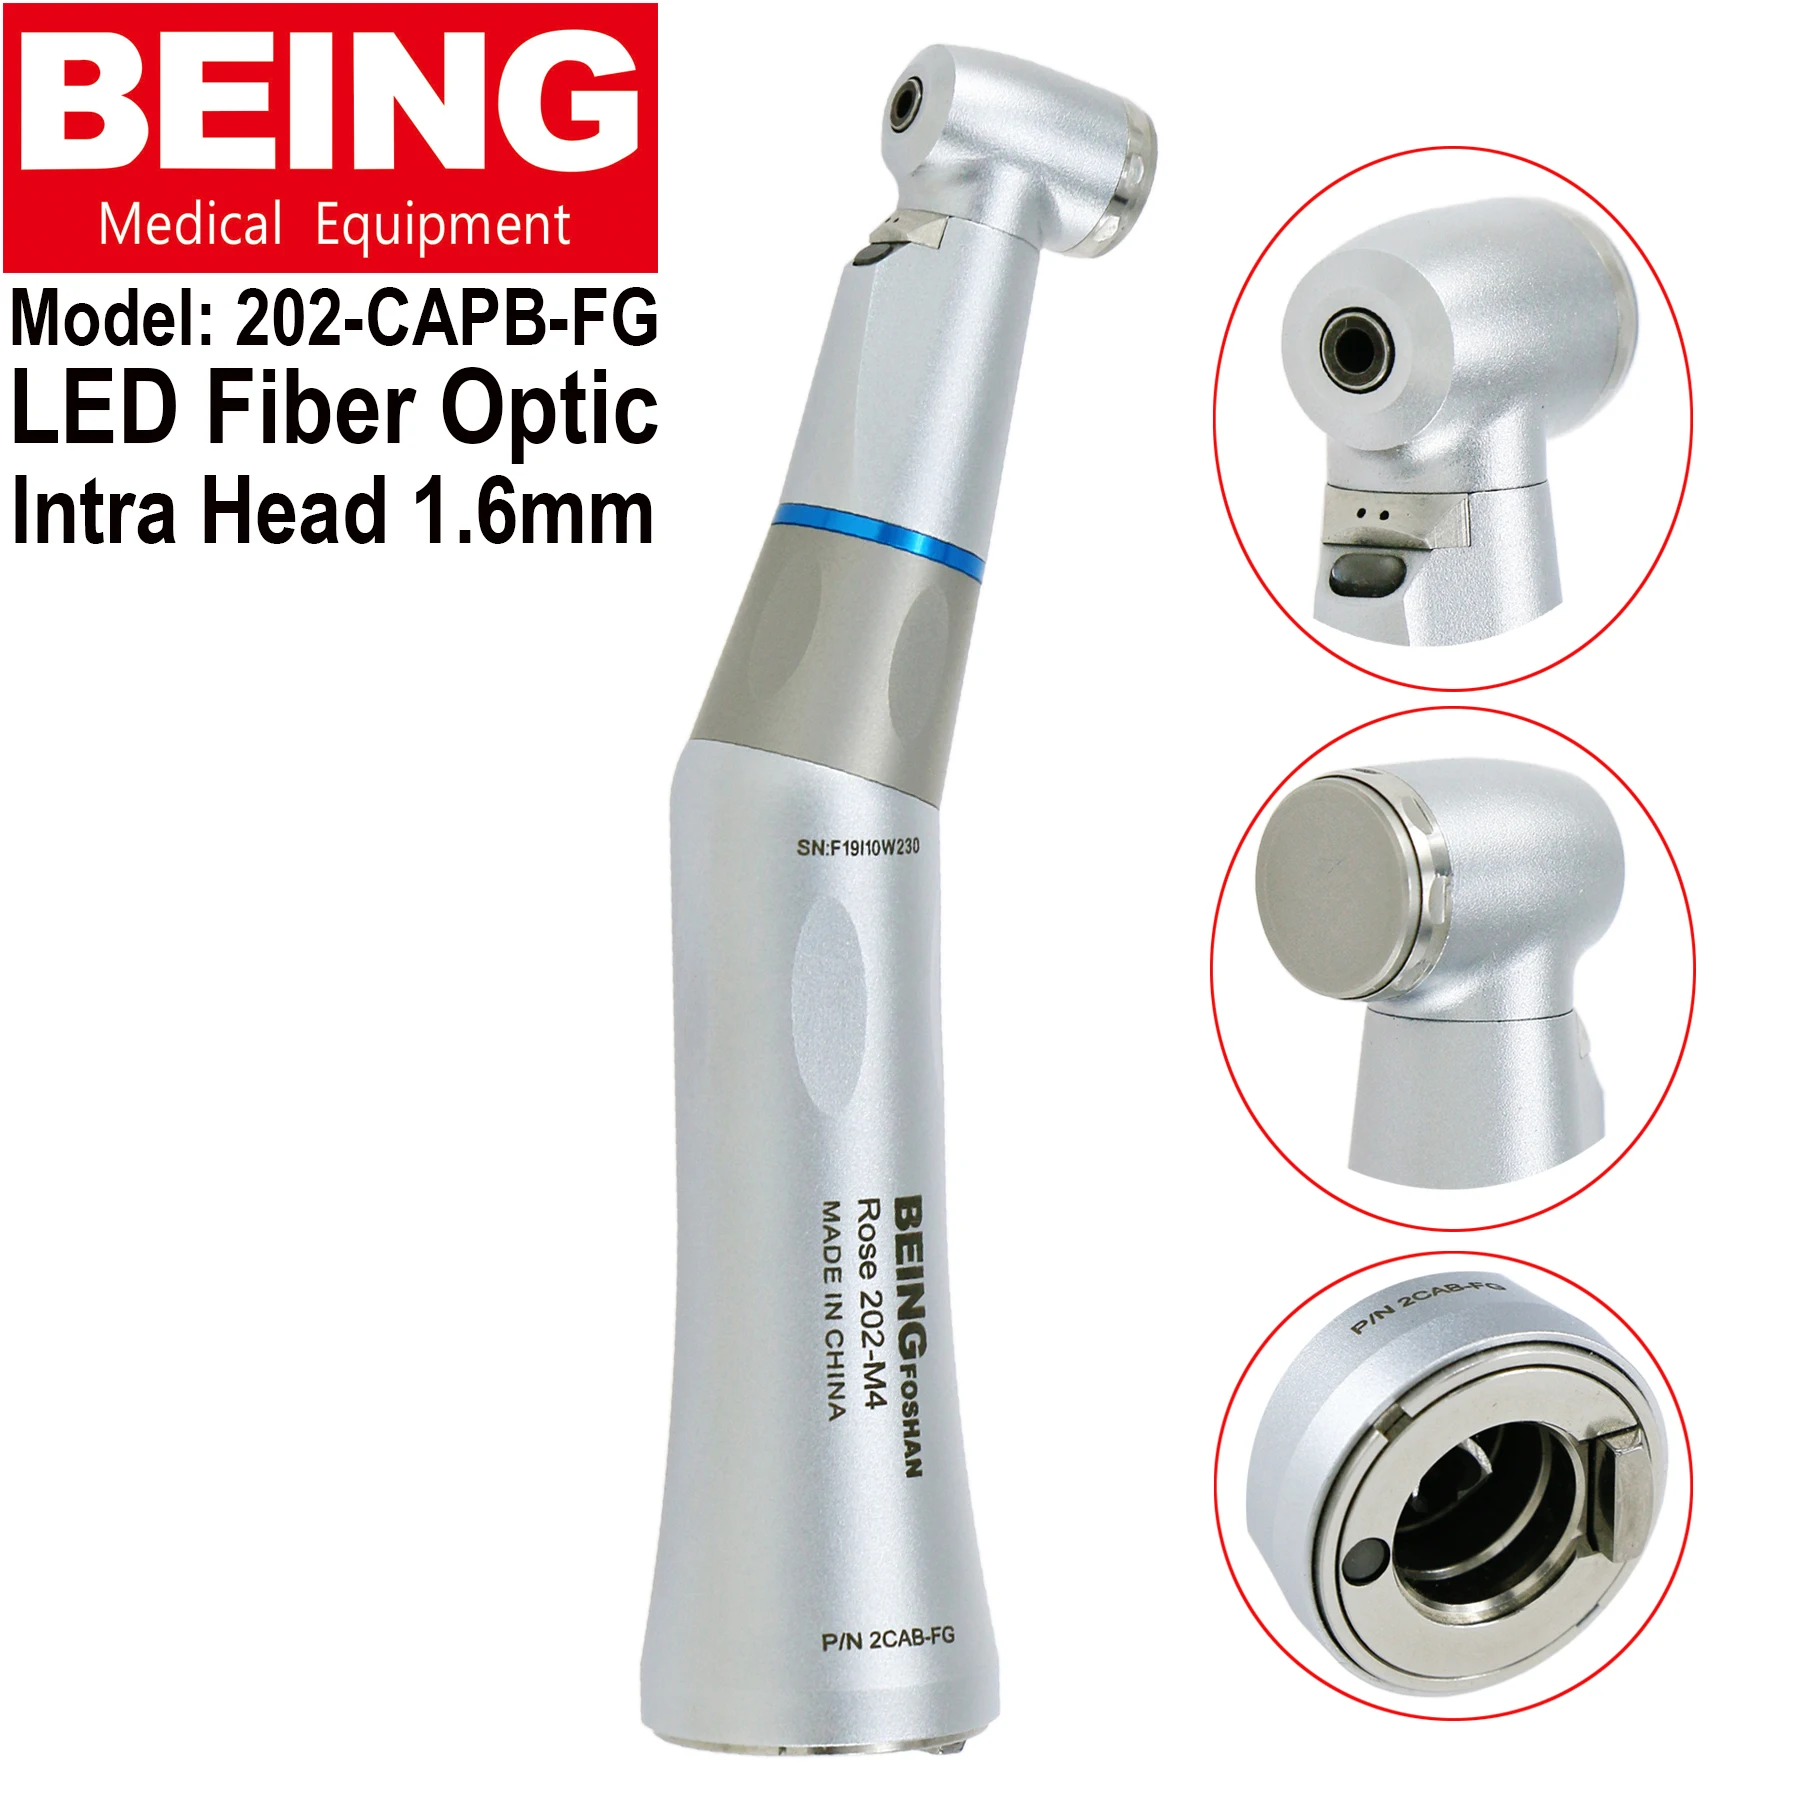 BEING Dental 1:1 LED Fiber Optic Low Speed Inner Water Push Button Contra Angle Handpiece Rose 202CAPB-FG FG Bur1.6mm NSK KAVO